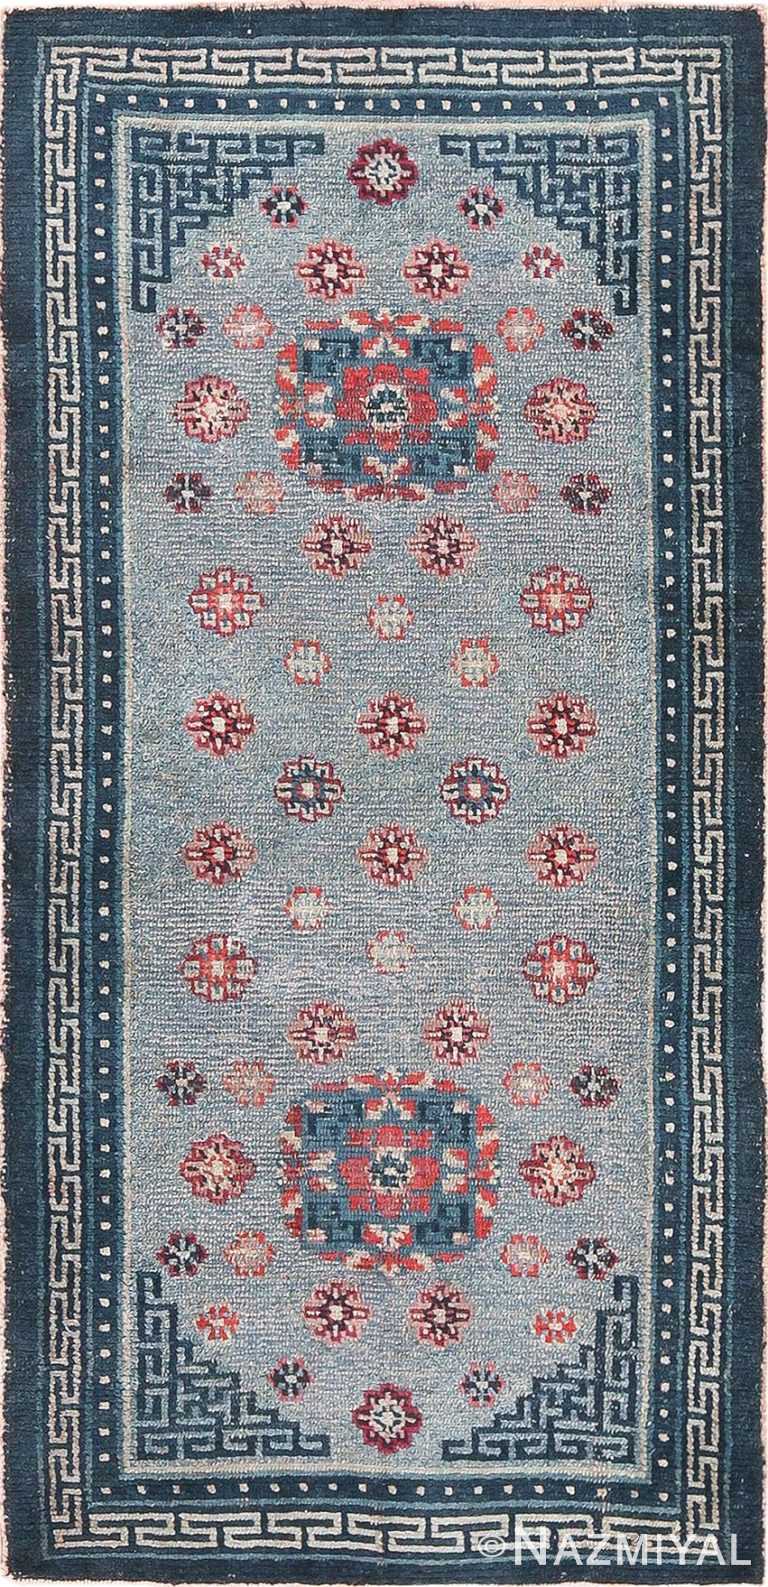 Small Scatter Size Antique Tibetan Rug 49796 - Nazmiyal